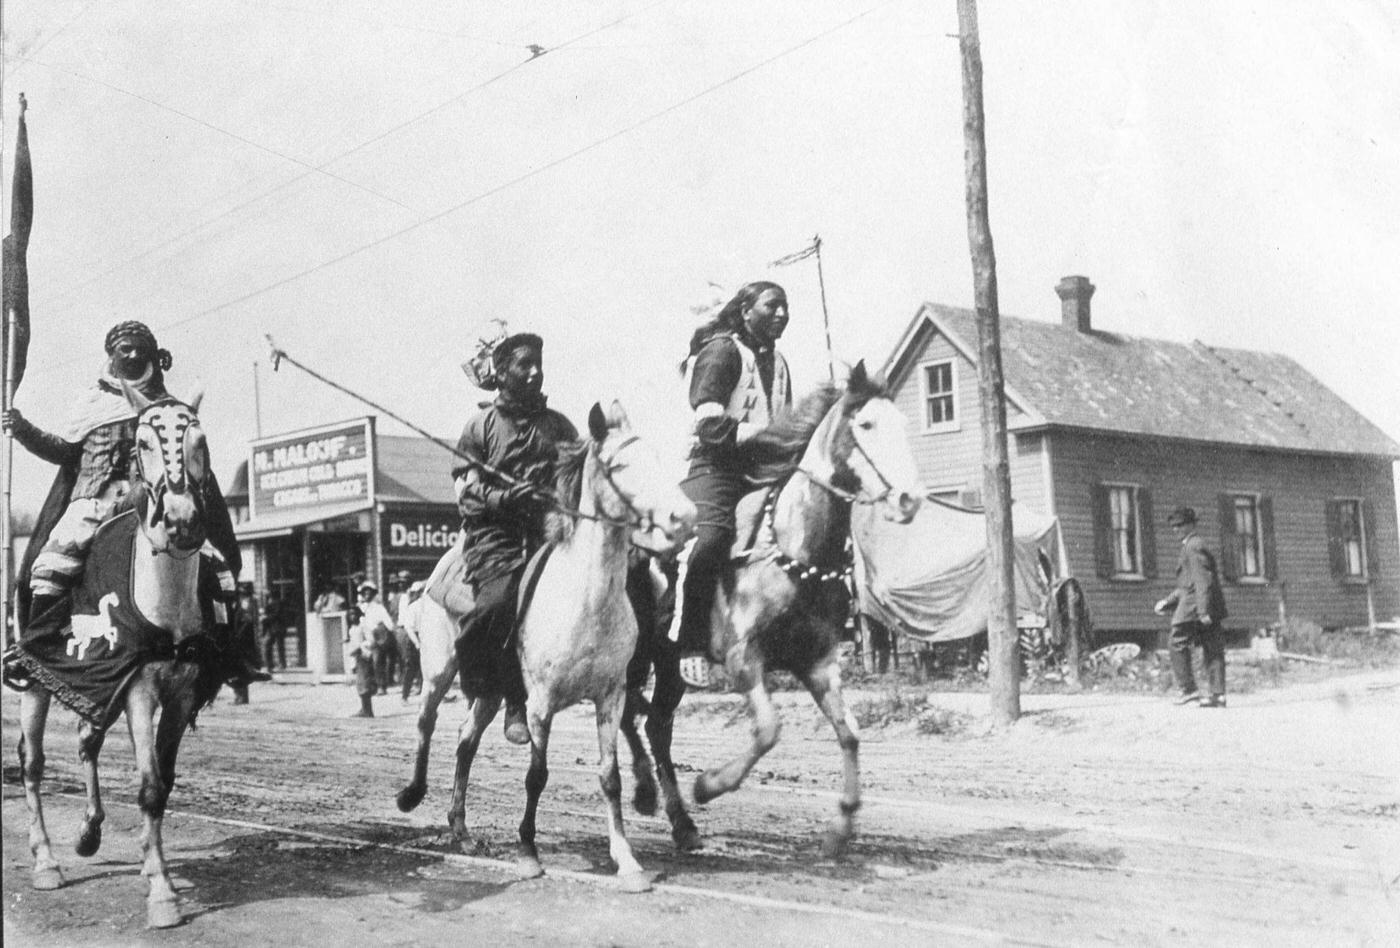 A photograph shows three Native American men riding horses during Buffalo Bill's Wild West Show, United States, late 19th century. They race down a road in a rural town.